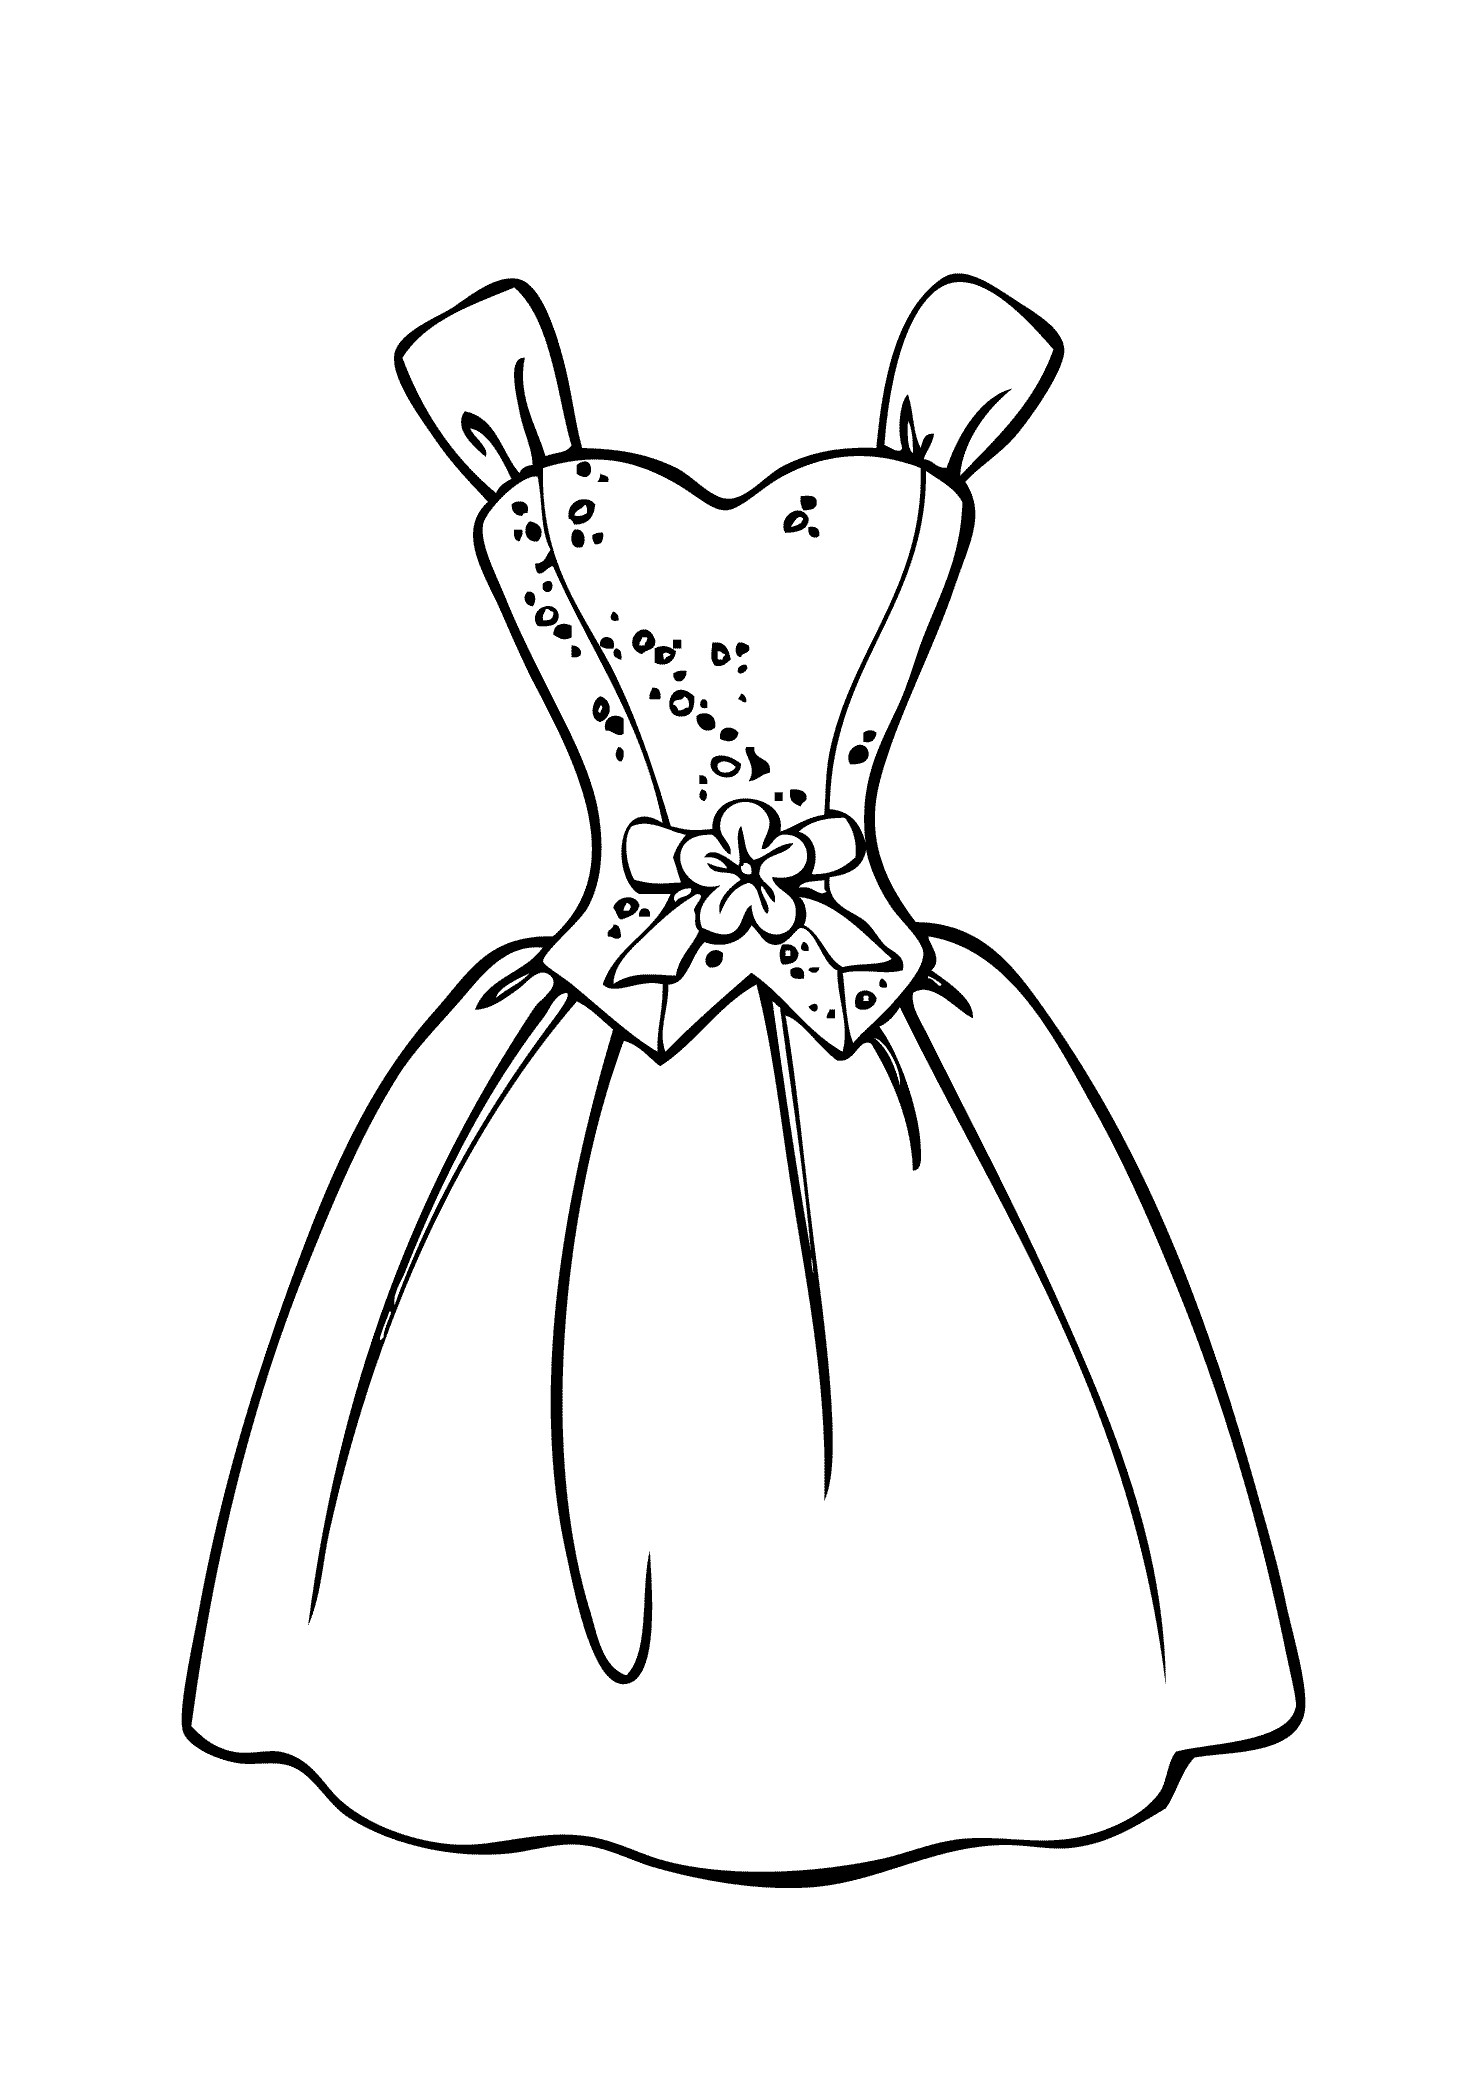 Printable Coloring Pages For Girls With Shirts
 Printable Coloring Pages OF FASHION CLOTHING Coloring Home